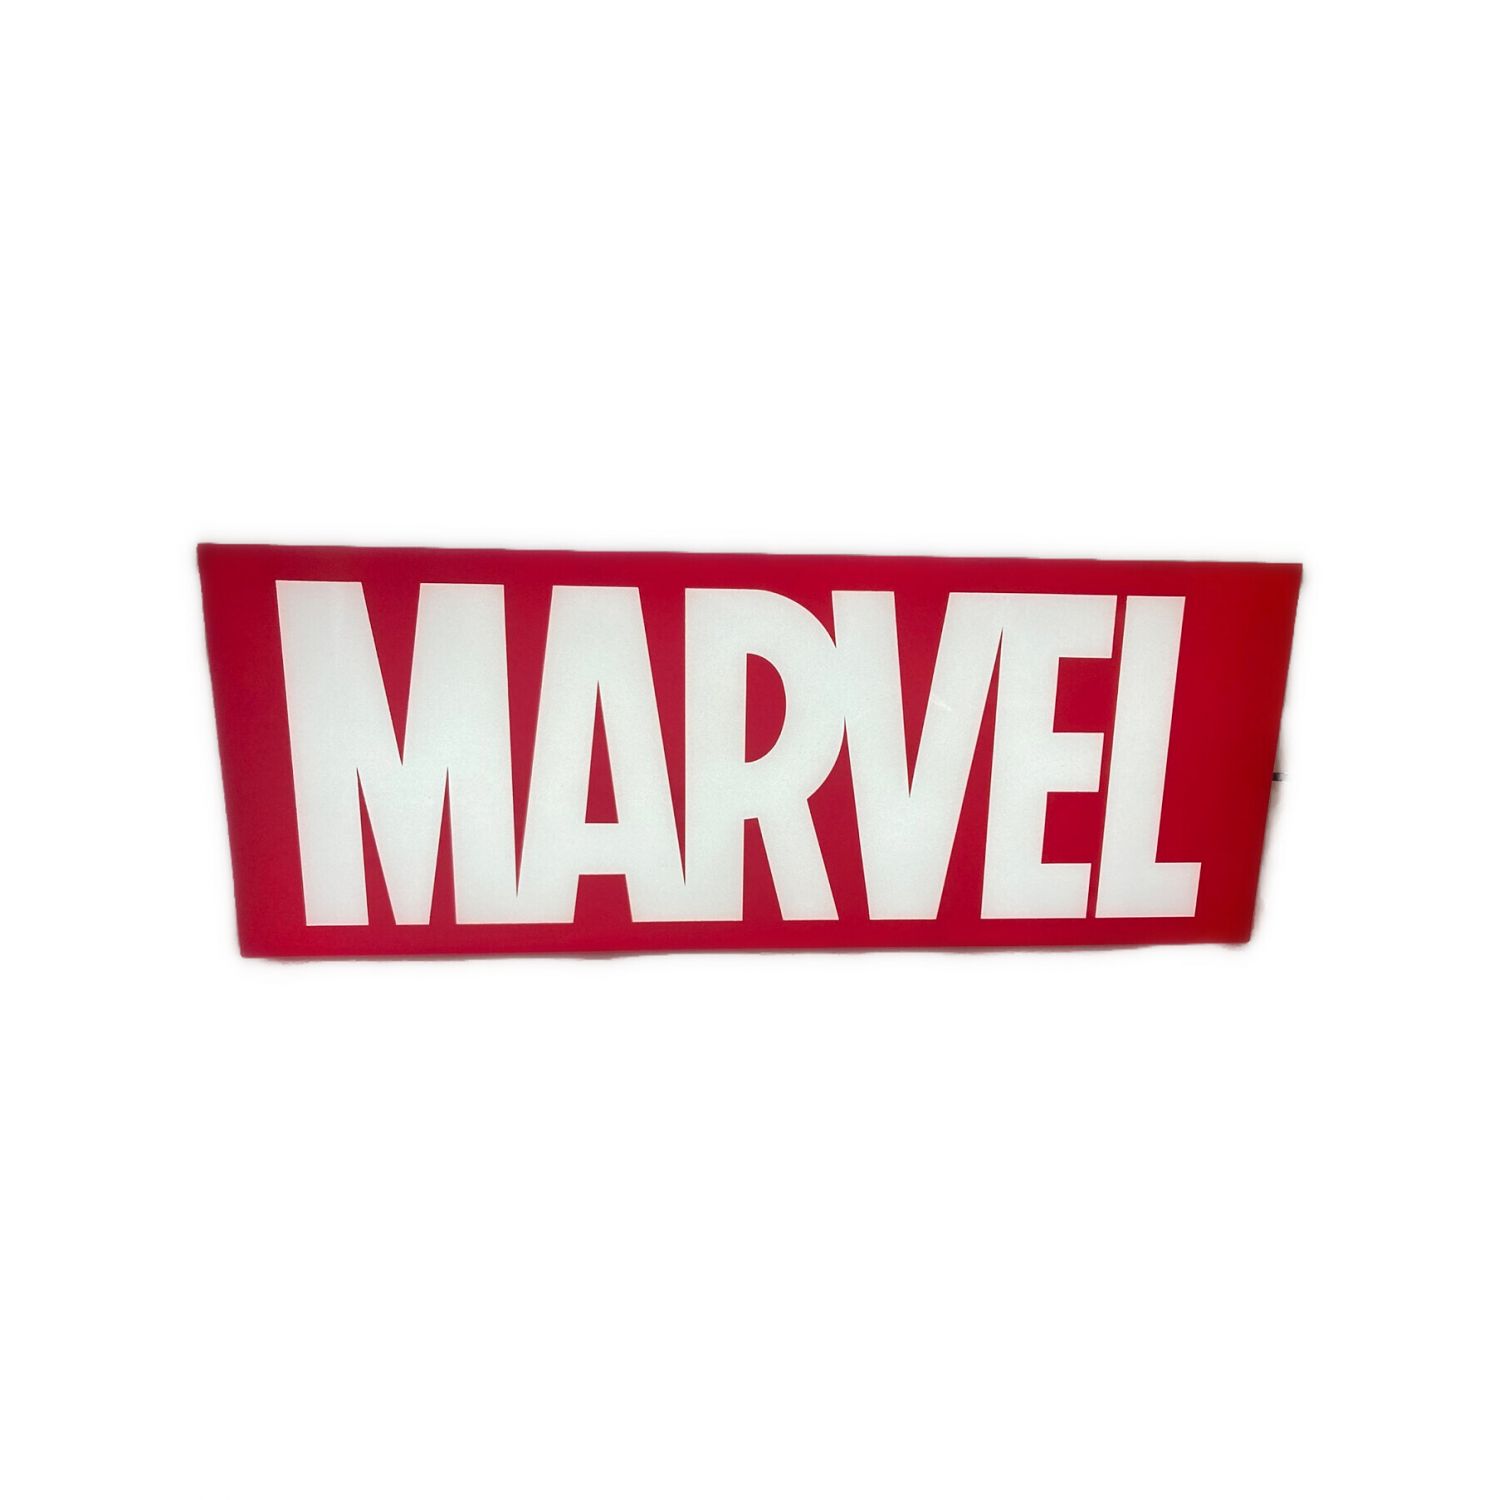 「MARVEL」ロゴ ライトボックス THE FIRST TEN YEARS Hot Toys 